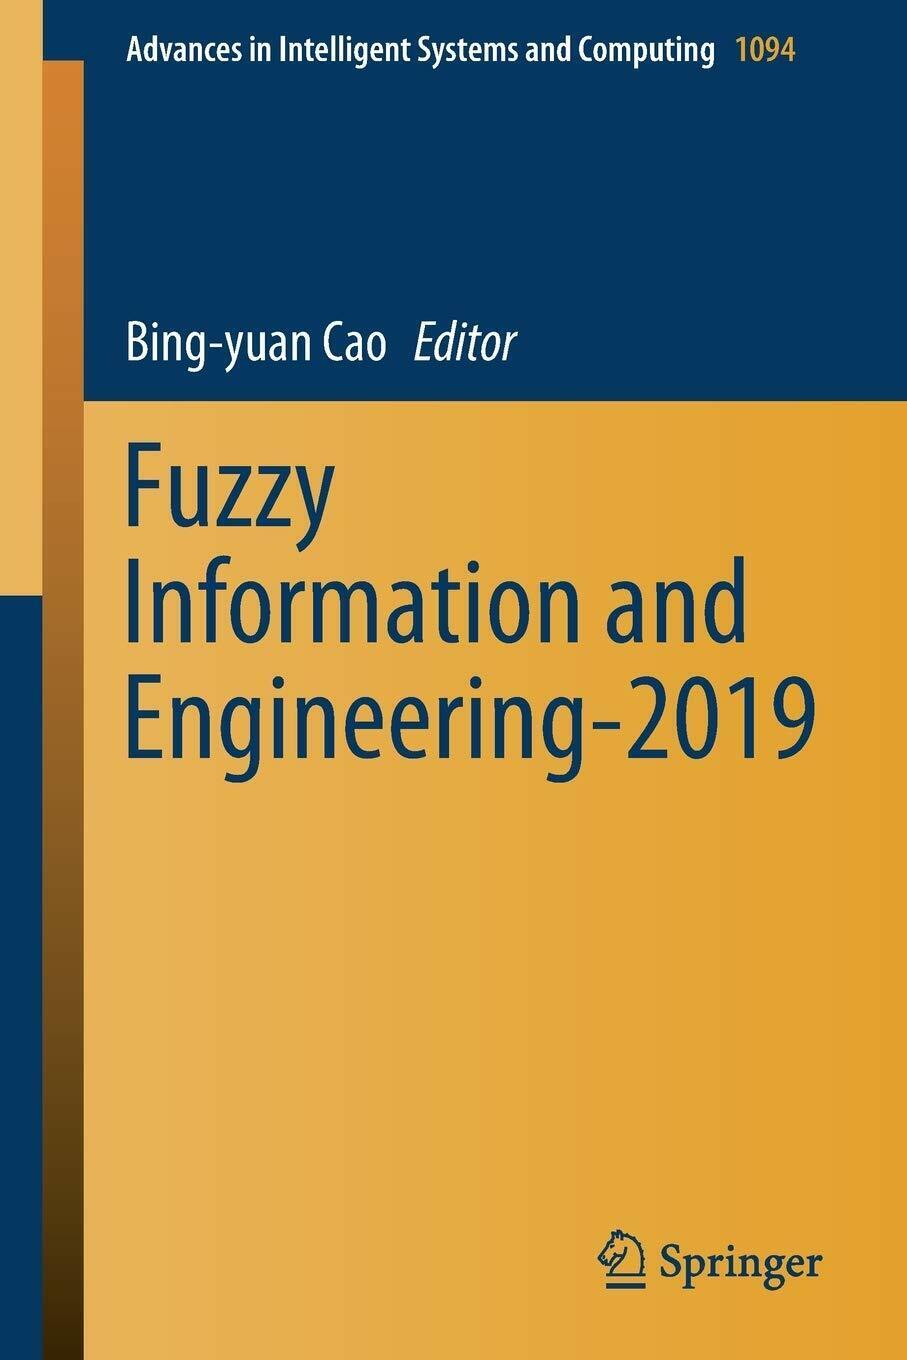 Fuzzy Information and Engineering-2019 - Bing-yuan Cao - Springer, 2020